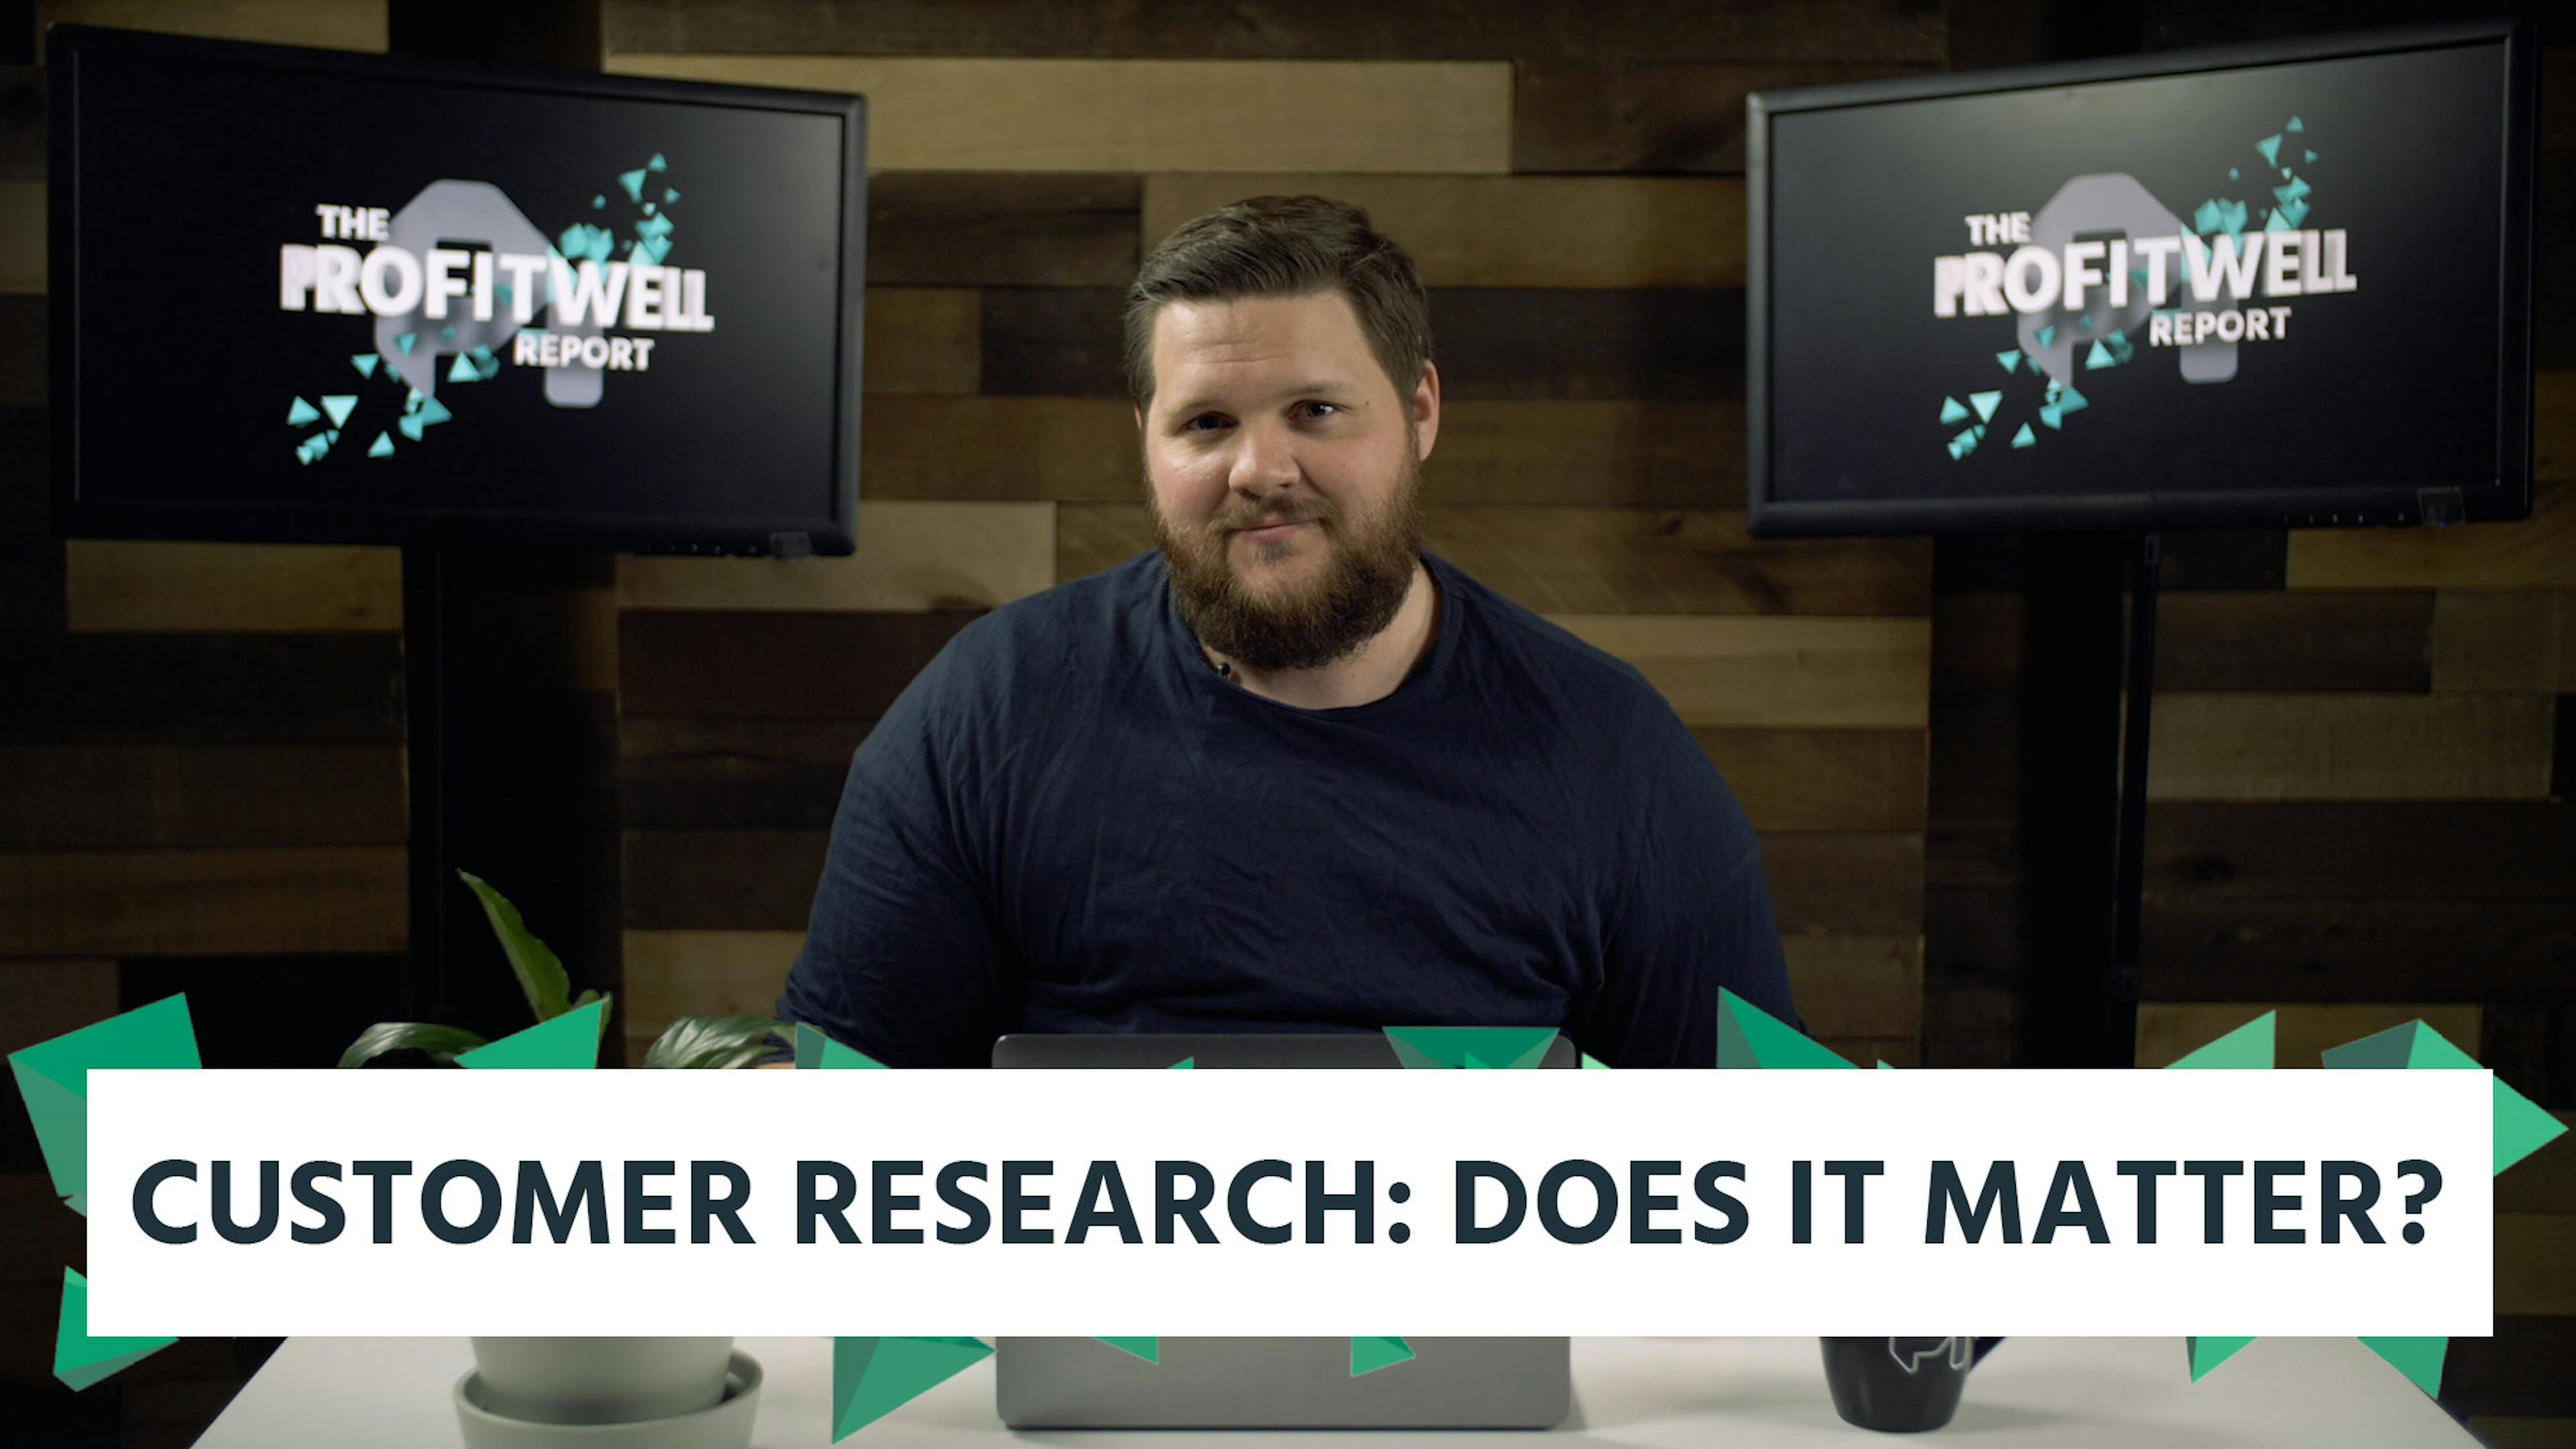 PWR Thumbnail - Customer Research: Does It Matter?